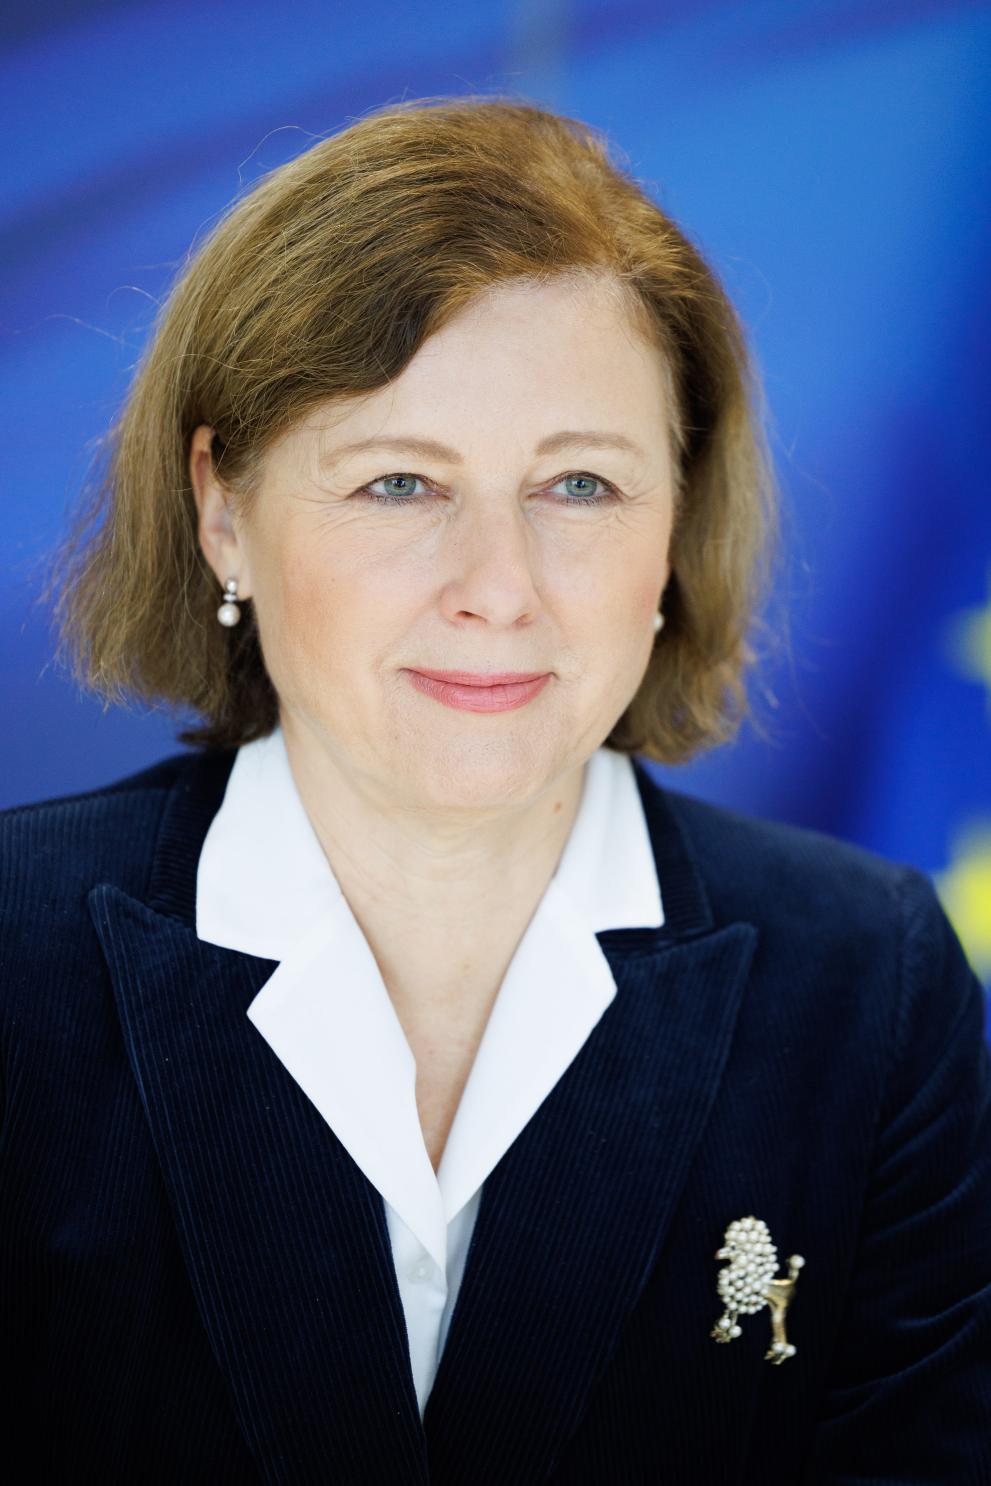 Visit of Sirpa Rautio, Chair of the European Network of National Human Rights Institutions (ENNHRI), to the European Commission